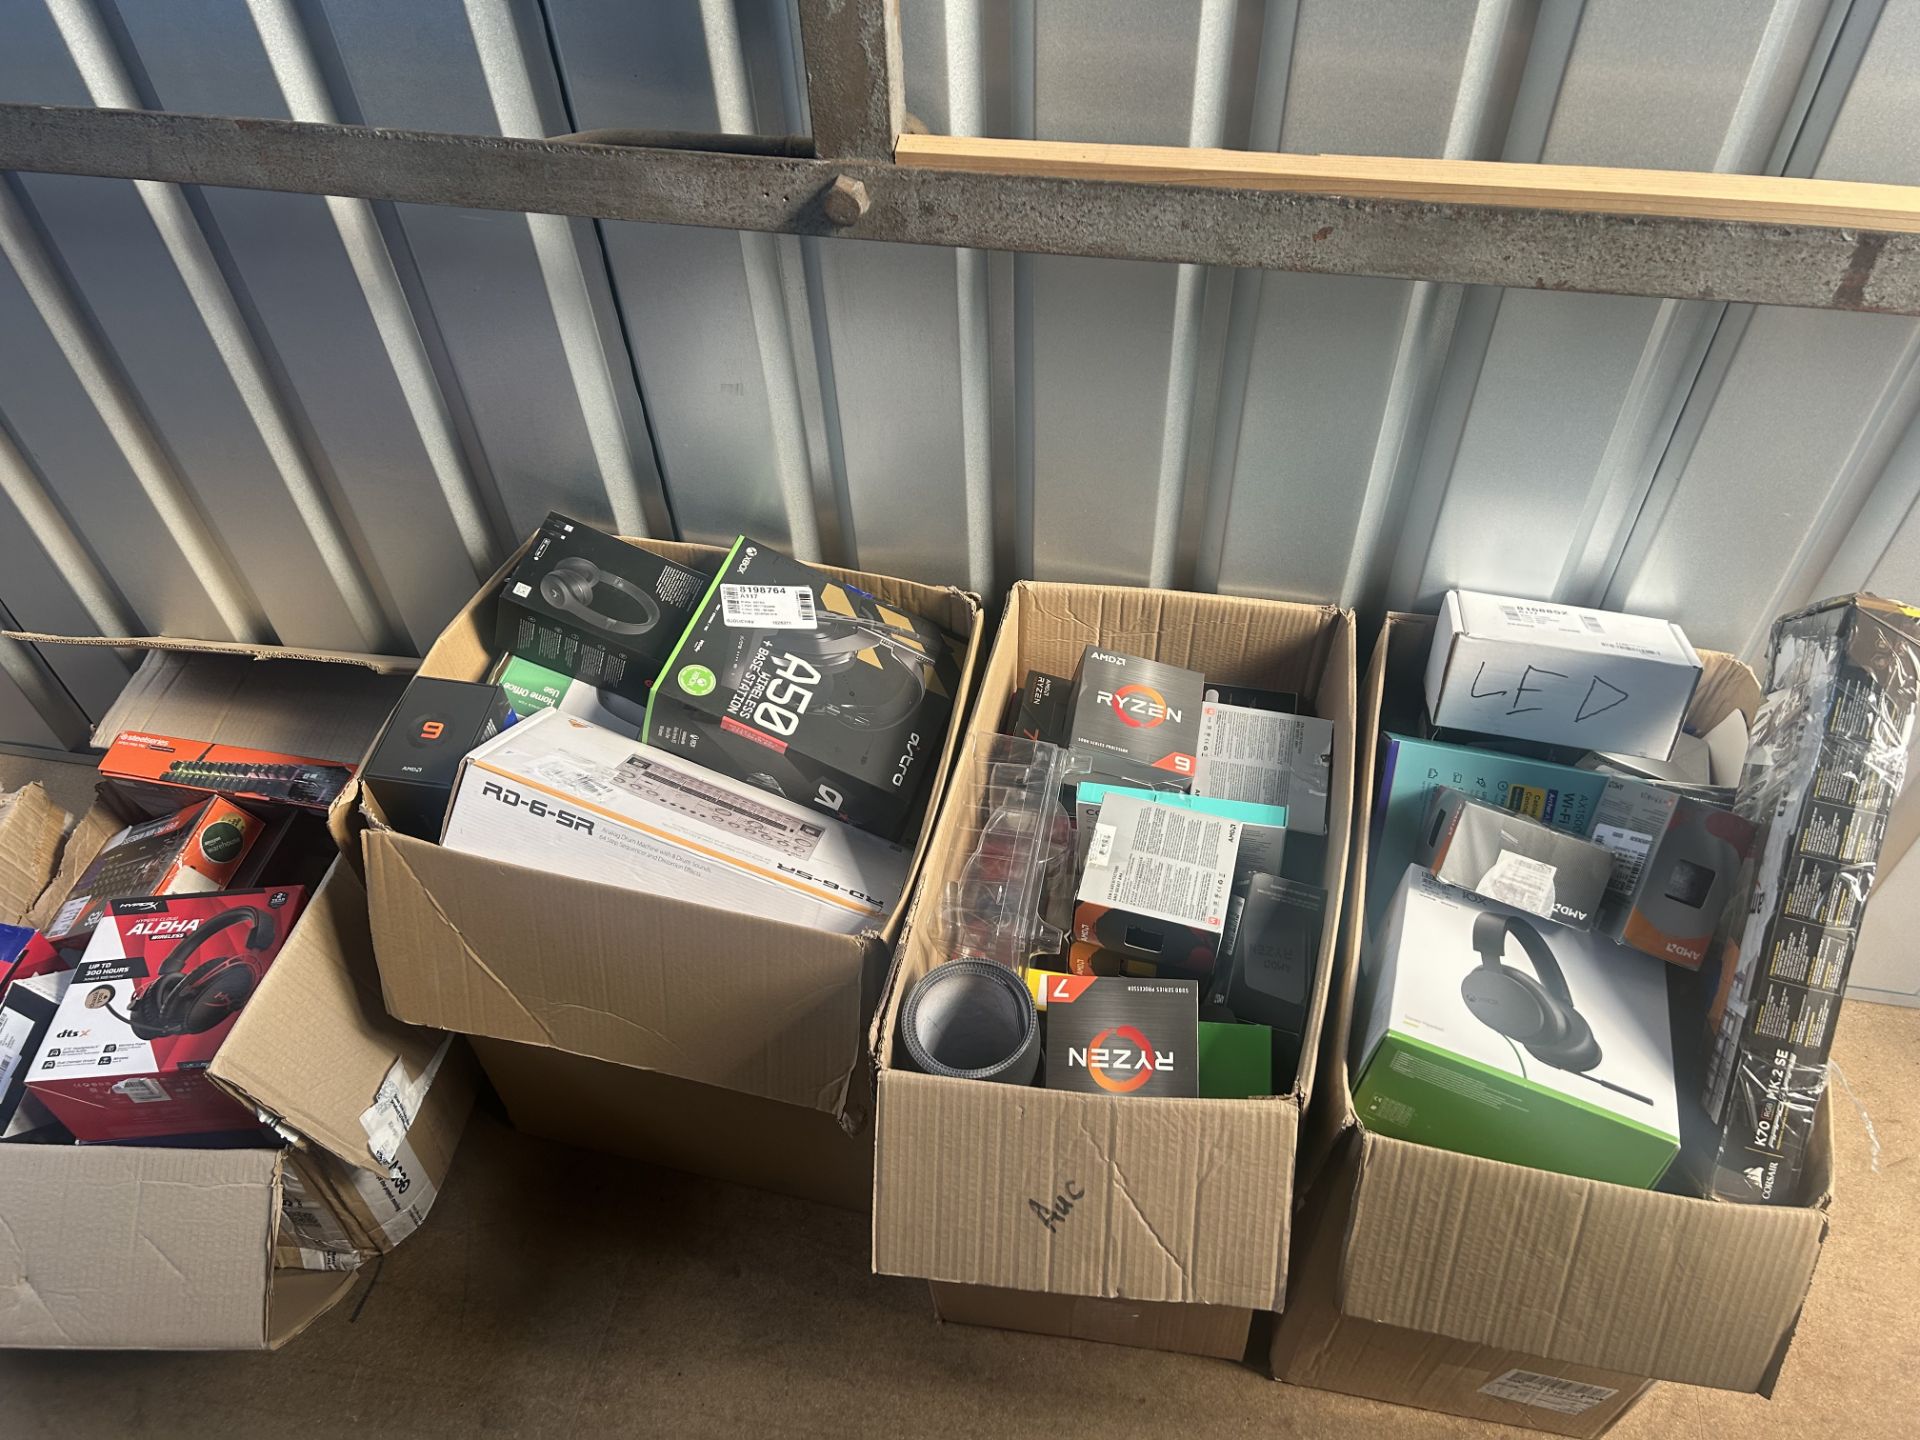 Boxes of Approximately 100+ Unprocessed/Untested Raw Return High Value Electrical Goods